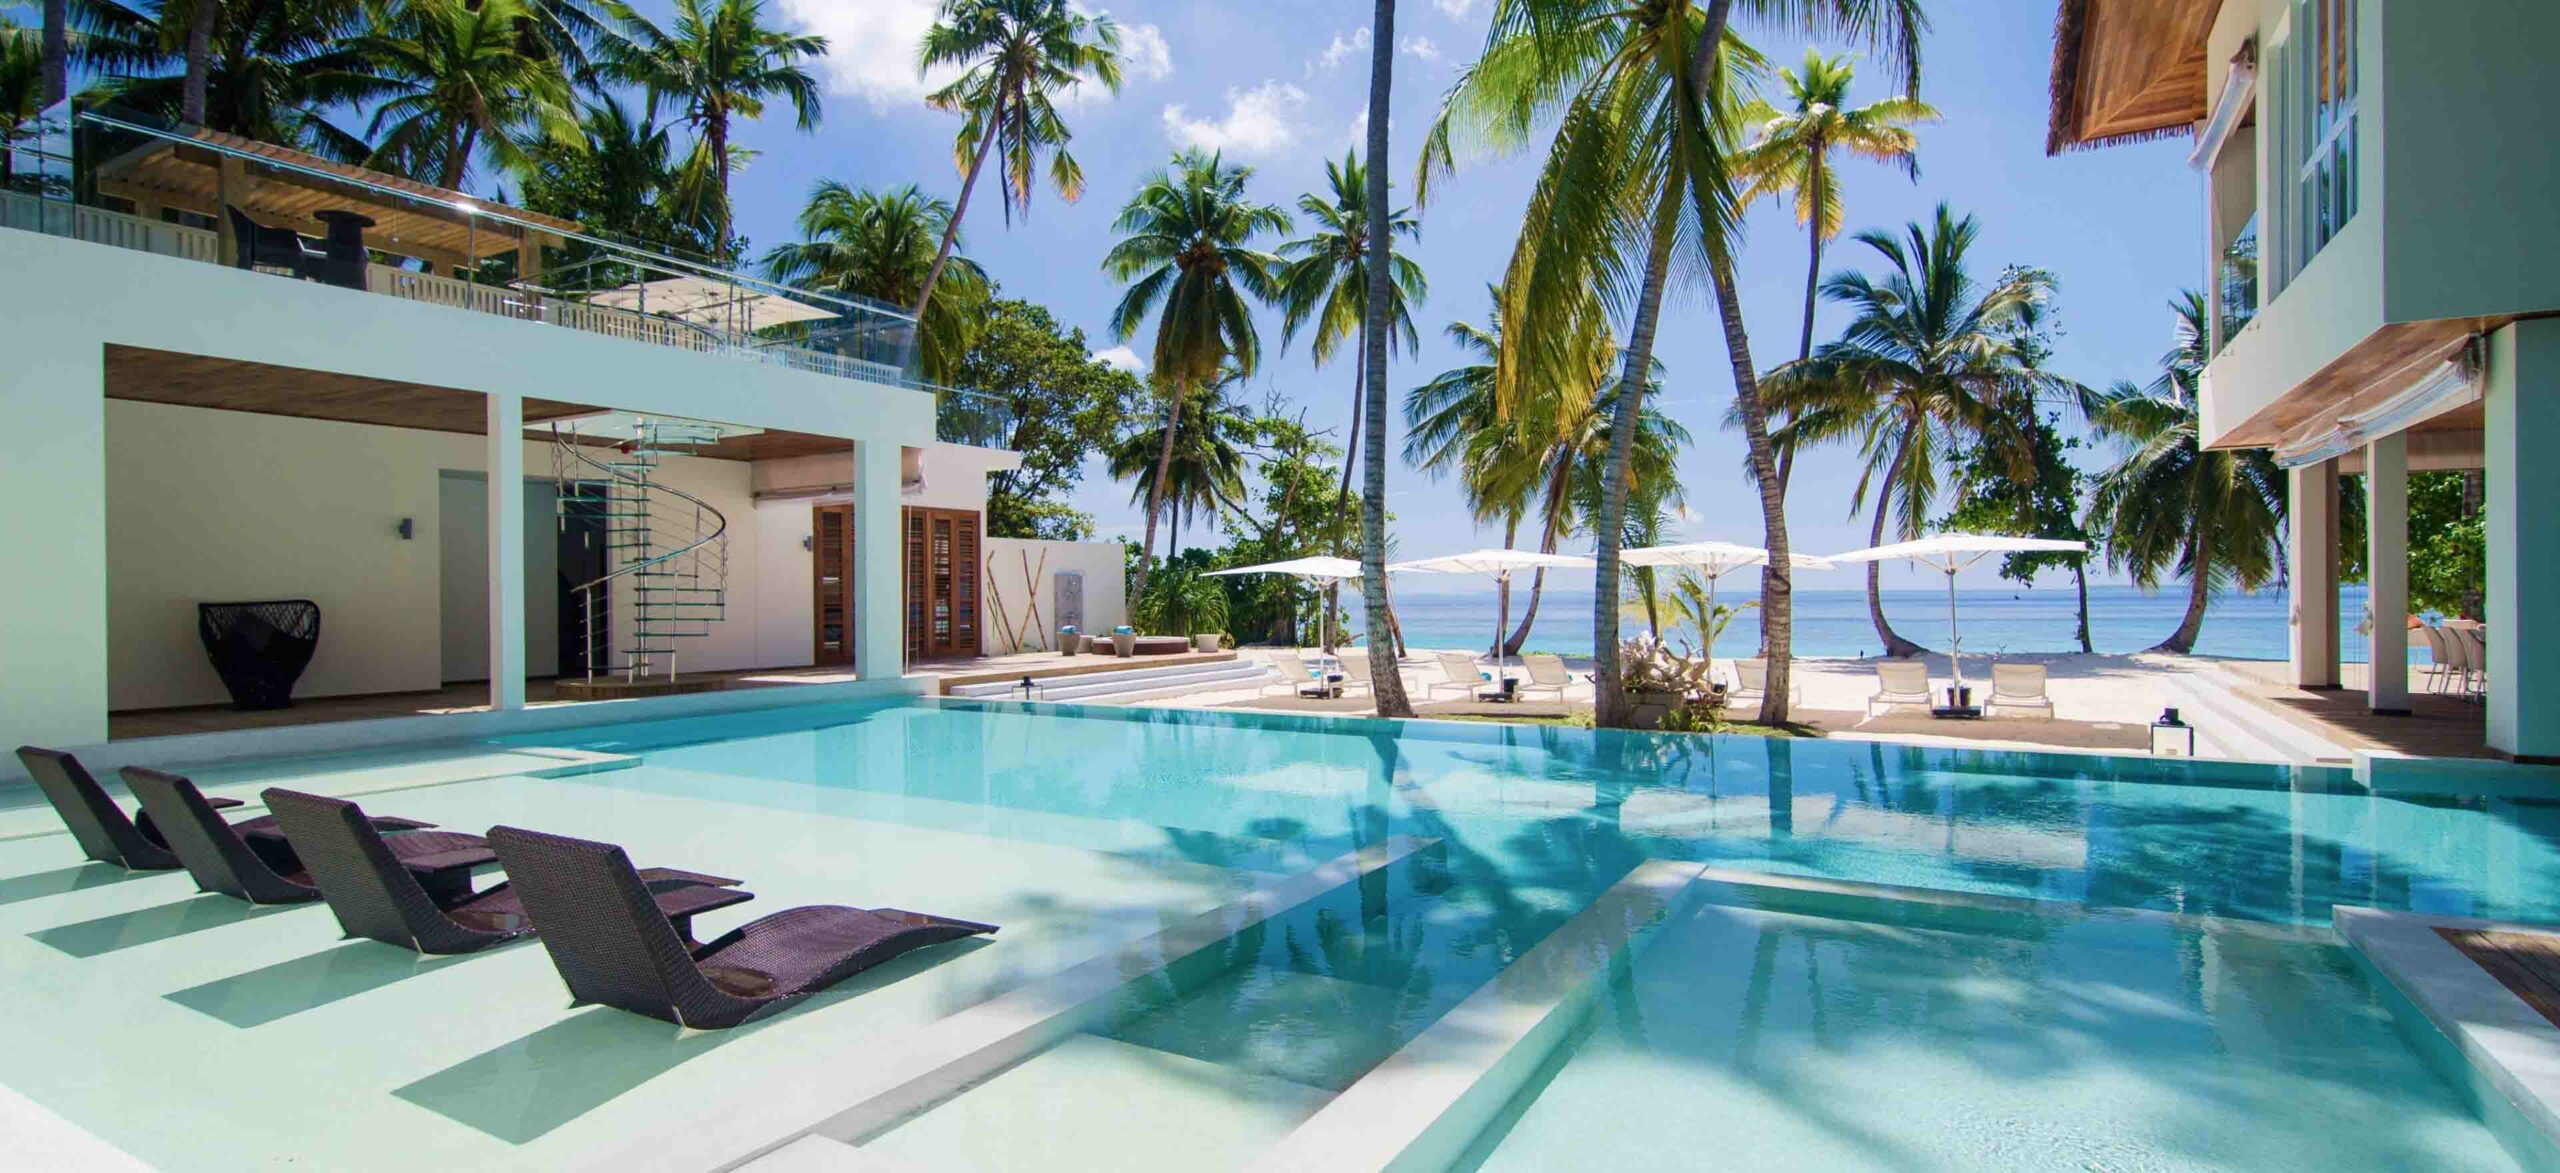 Poolside view of the Amilla Estate - The Mansion in the Maldives